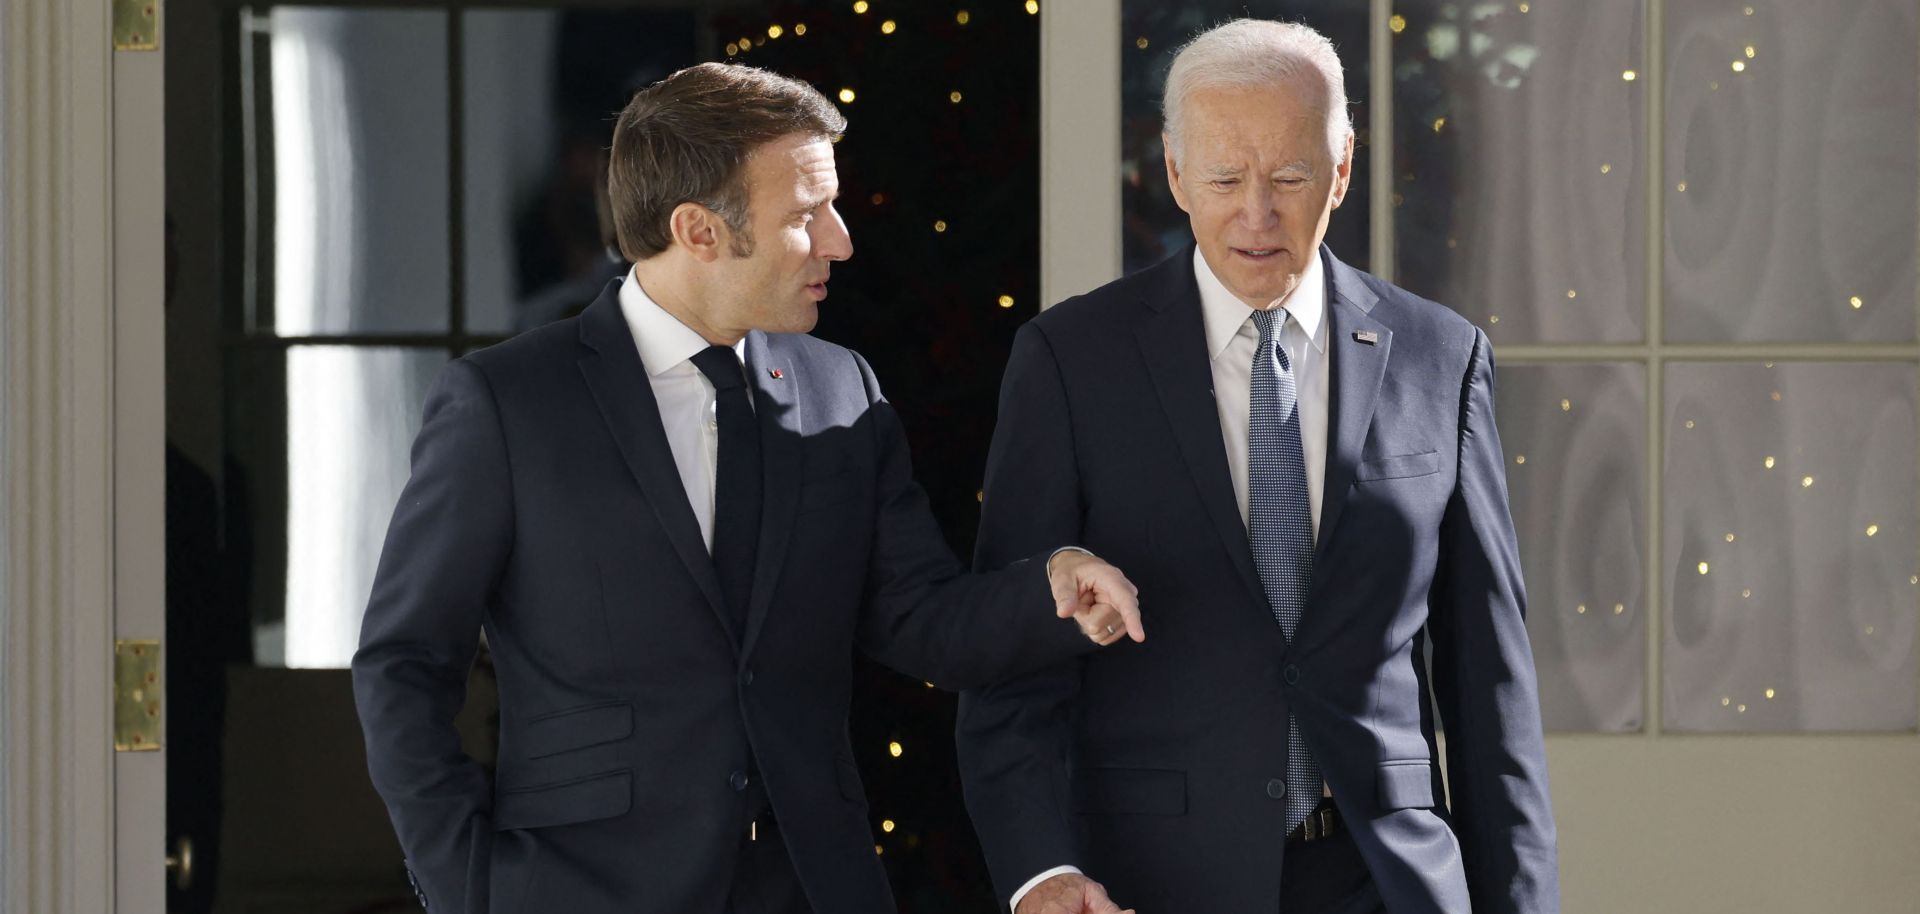 U.S. President Joe Biden (right) and French President Emmanuel Macron walk down the Colonnade at the White House in Washington, D.C., on Dec. 1, 2022. 